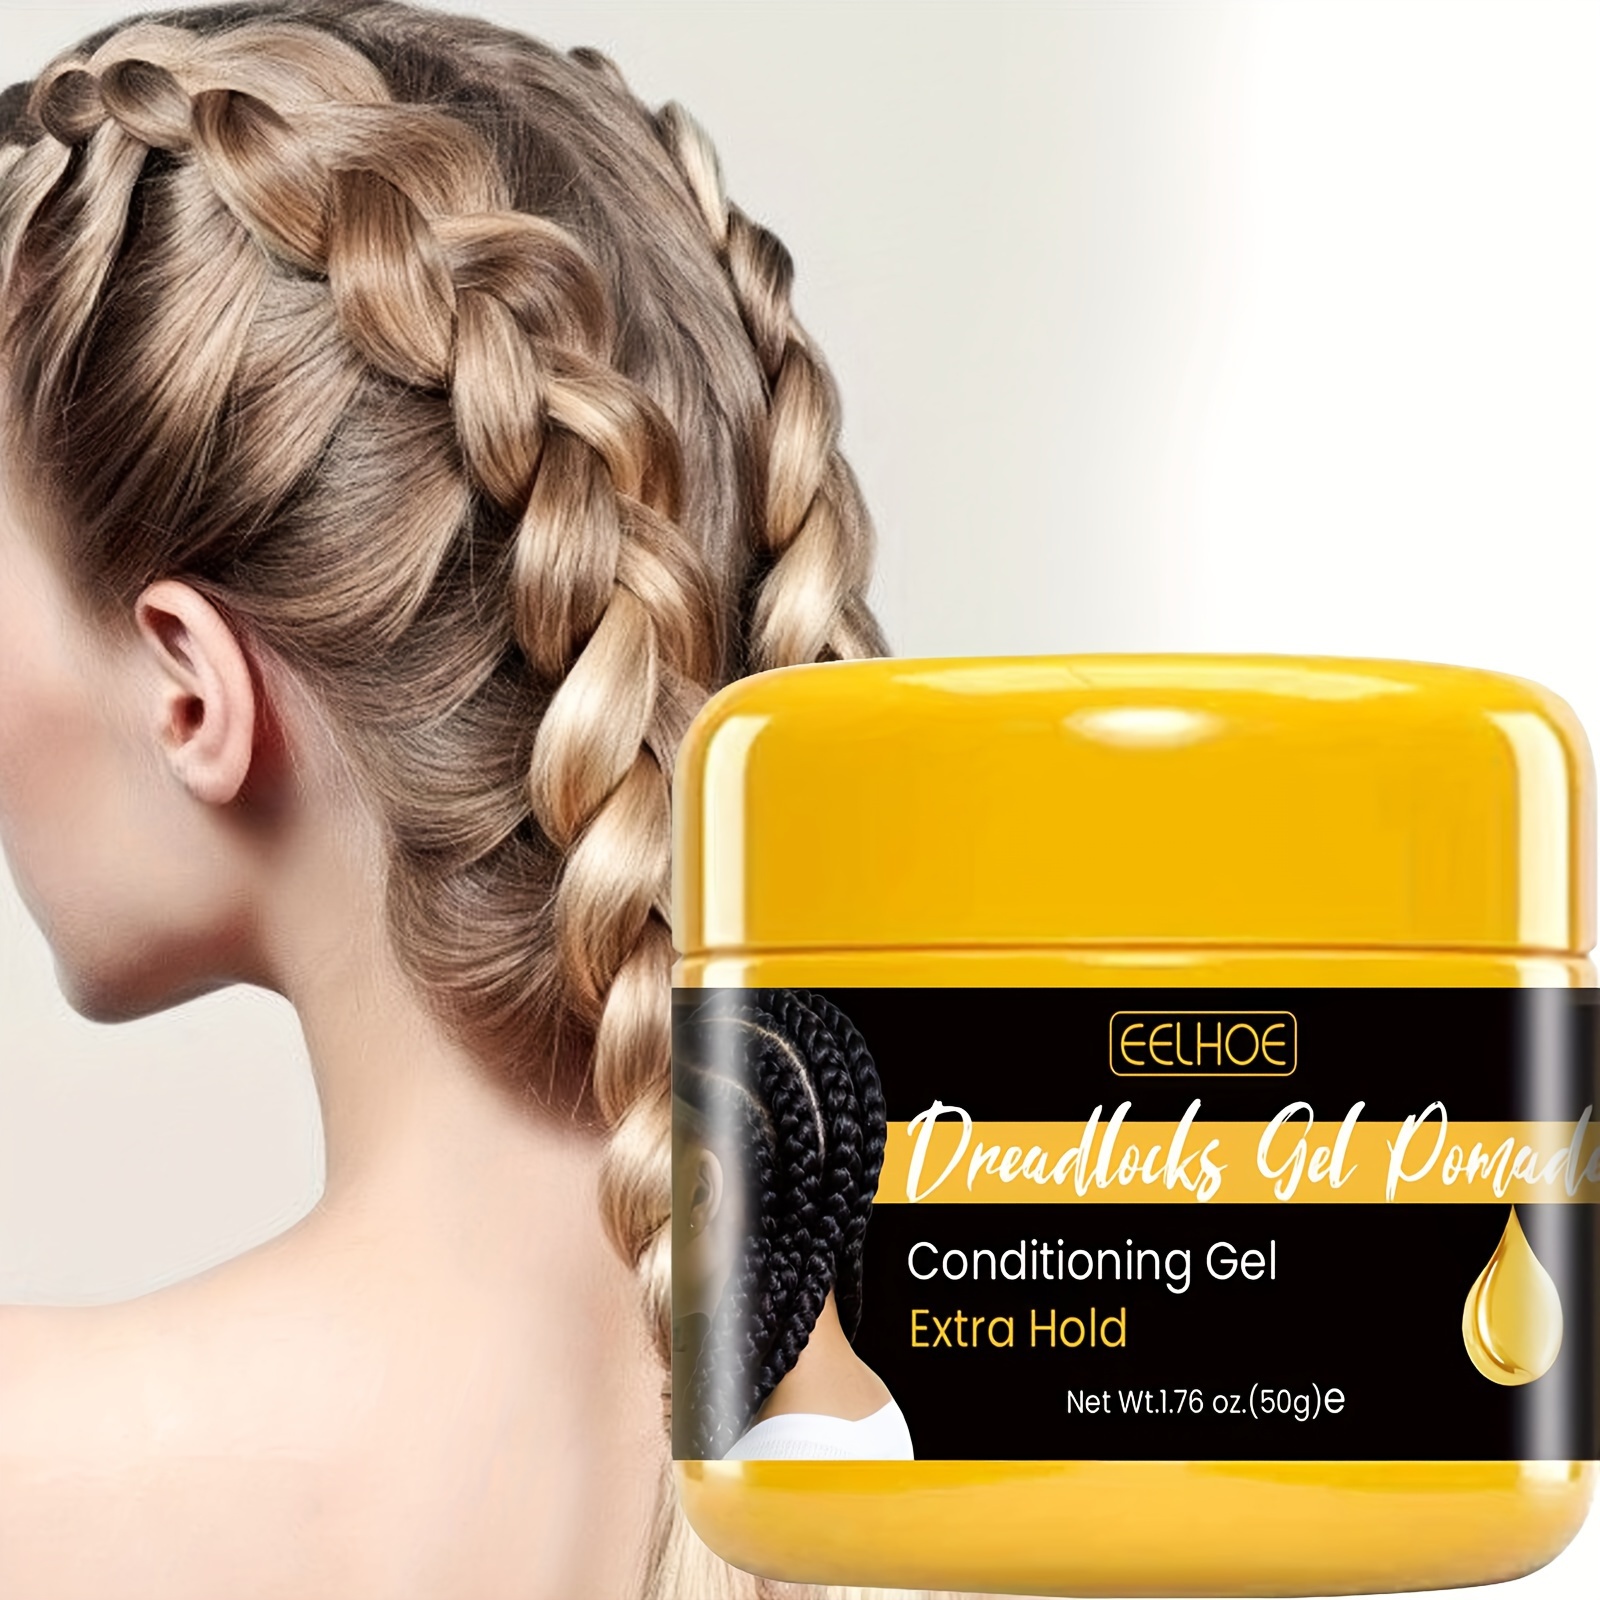 Pineapple Braid Gel: Achieve Extreme Hold for Stunning Braided